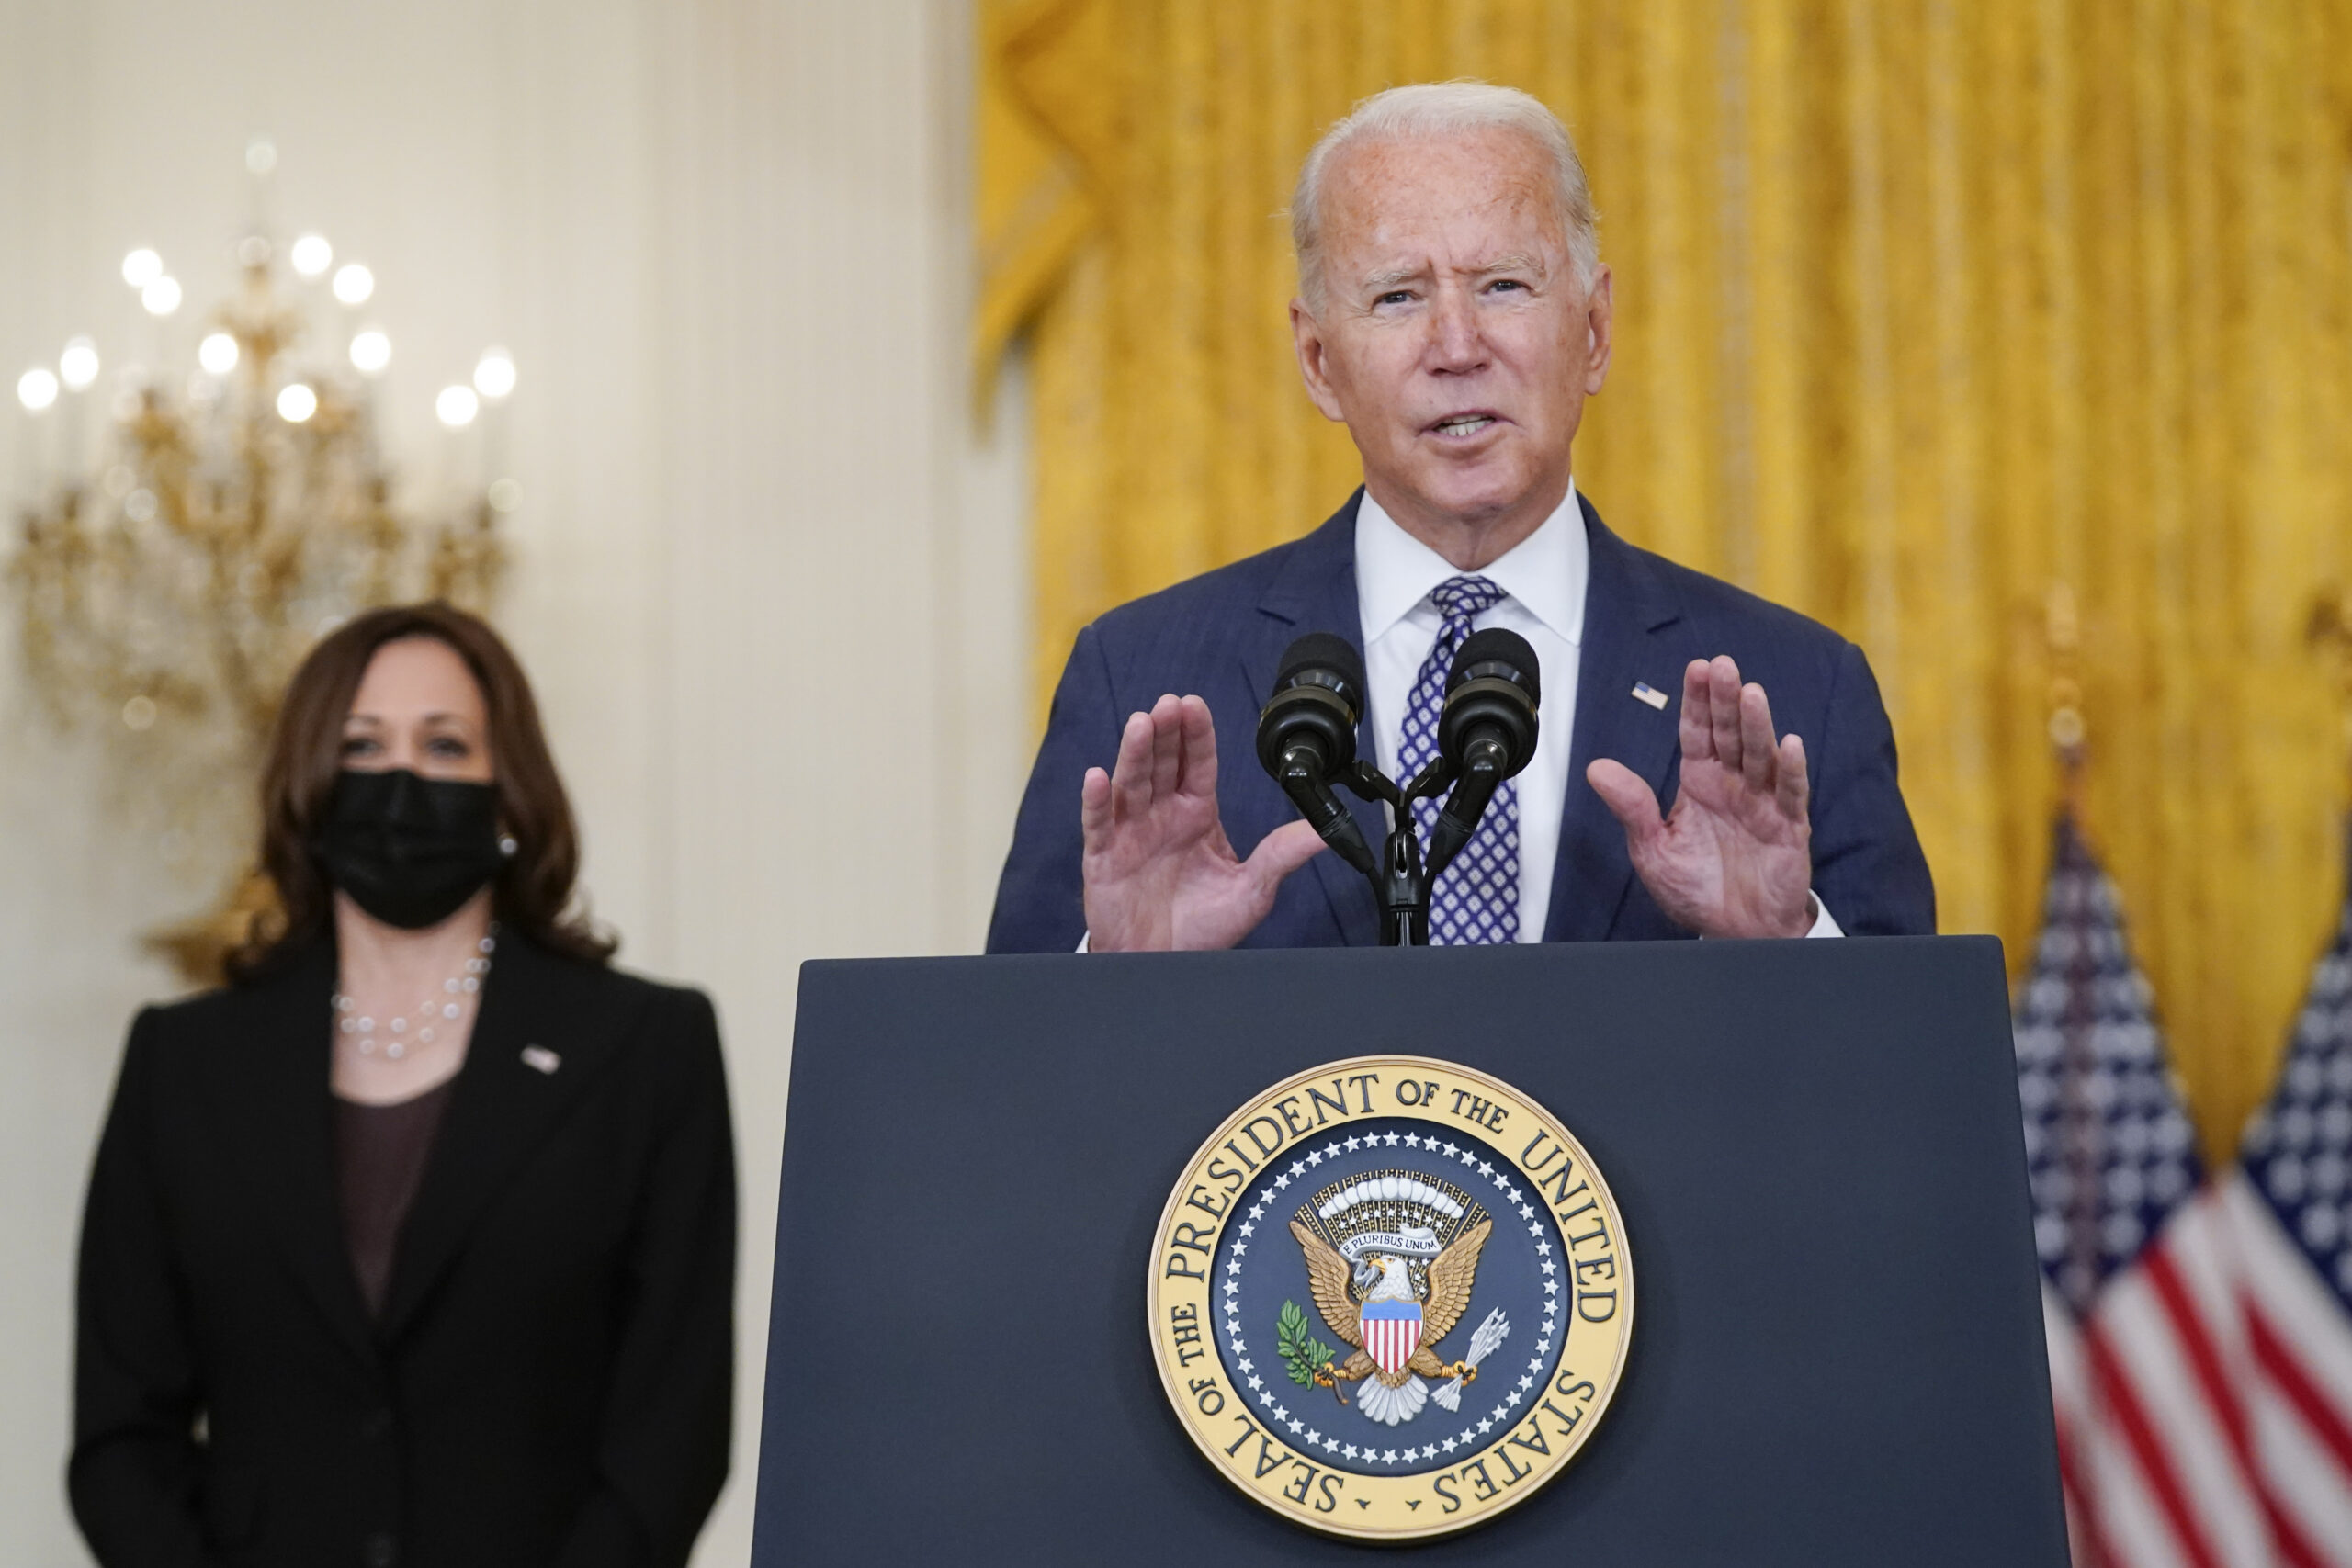 President Joe Biden speaks about the evacuation of American citizens, their families, SIV applicants and vulnerable Afghans in the East Room of the White House, Friday, Aug. 20, 2021, in Washington. Vice President Kamala Harris listens at left. (AP Photo/Manuel Balce Ceneta)